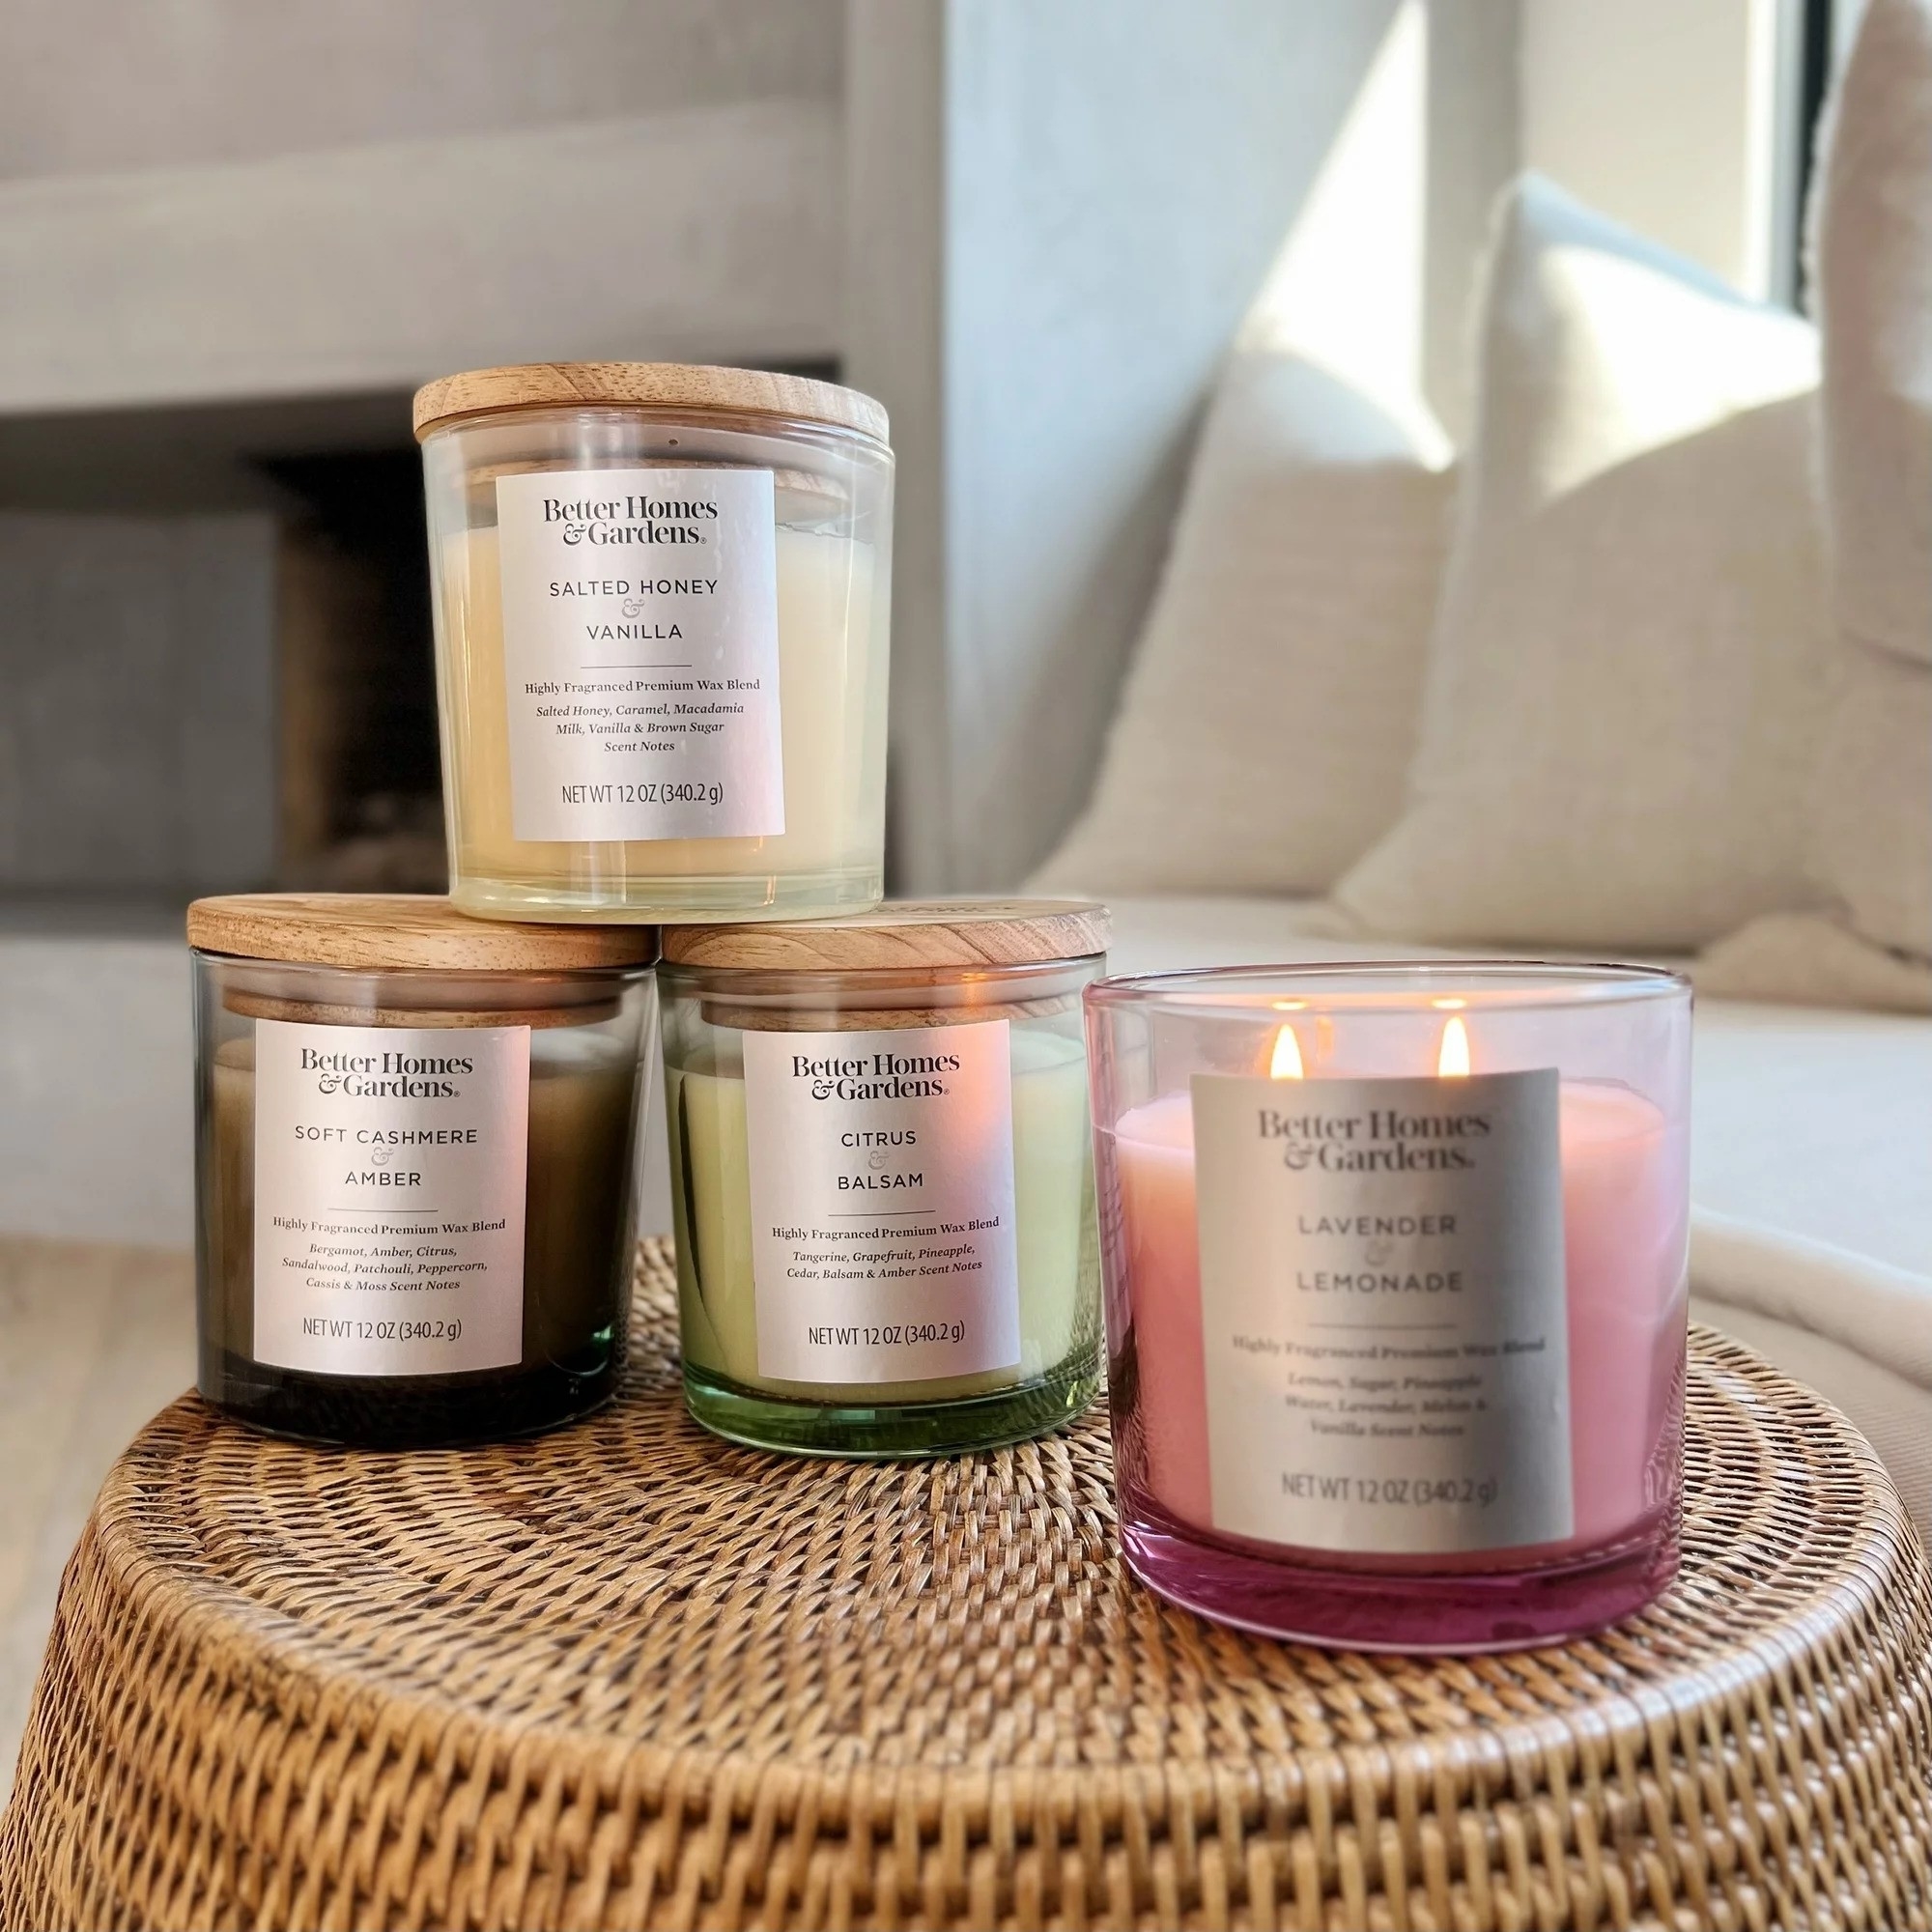 Four Better Homes and Gardens scented candles on a wicker table, with varying scents including Lavender Lemonade